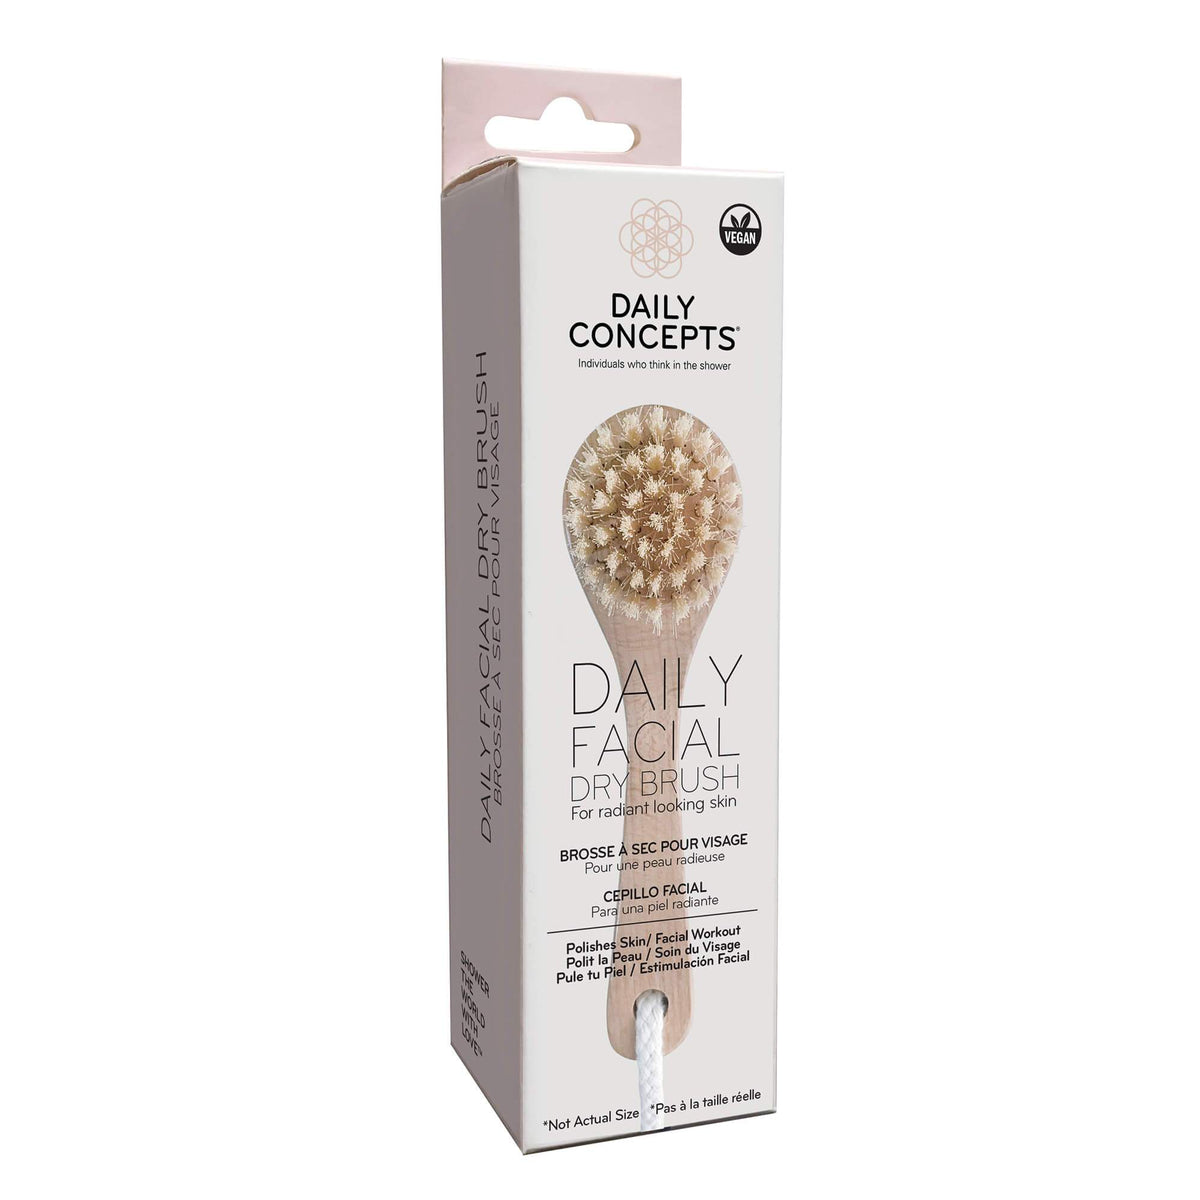 Daily Concepts Daily Silicone Facial Brush